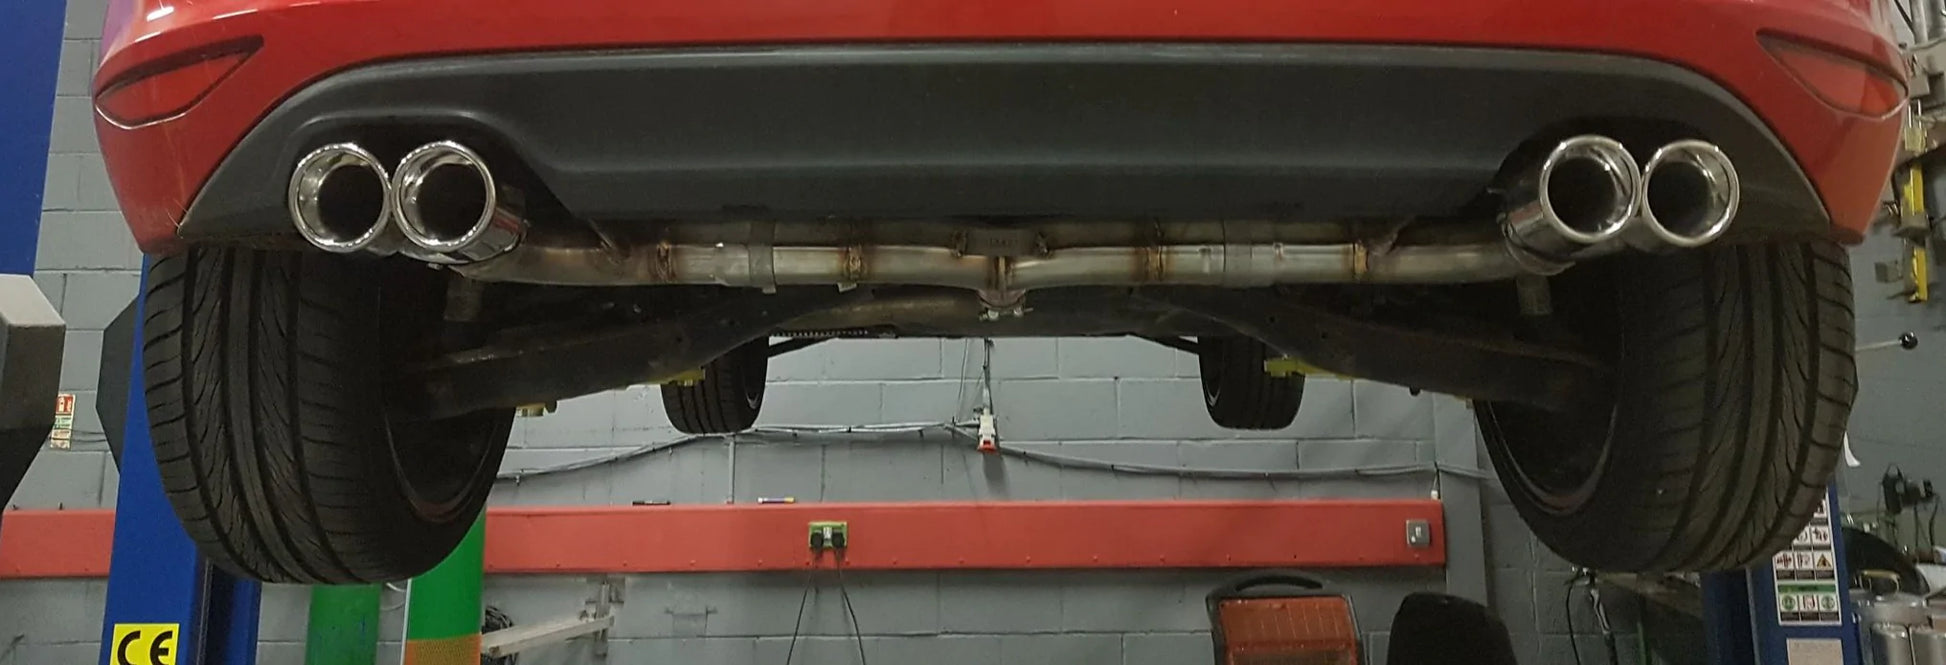 VW Golf MK7 2.0 GTD (without sound pack) Back Box Delete - Quad Exit Conversion Pipe Dynamics Performance Exhaust